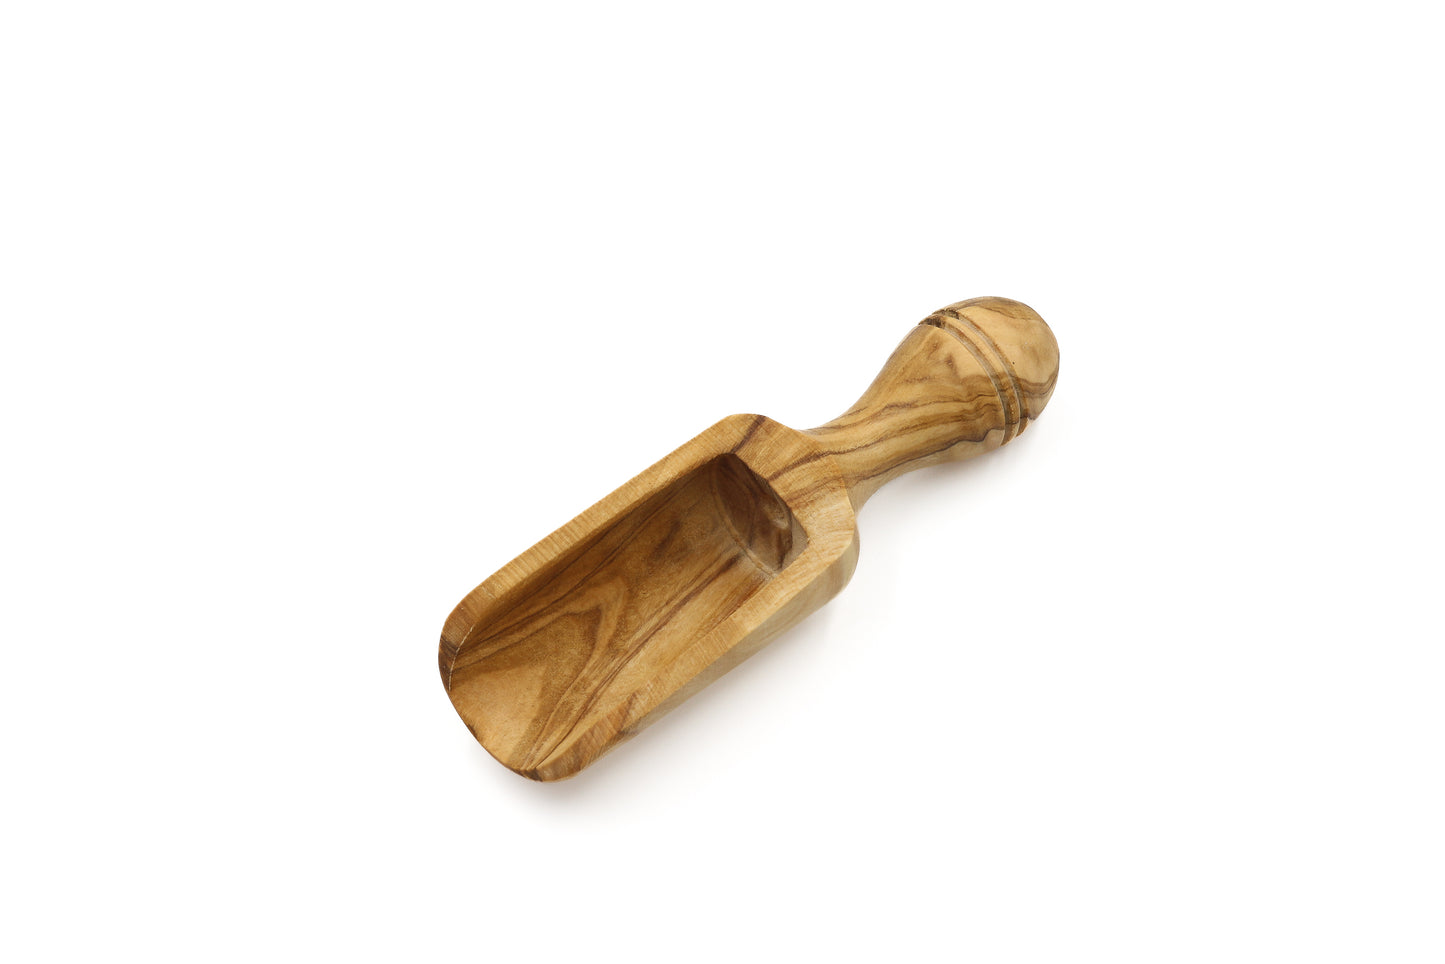 Olive wood measuring spoons and scoops for your culinary needs